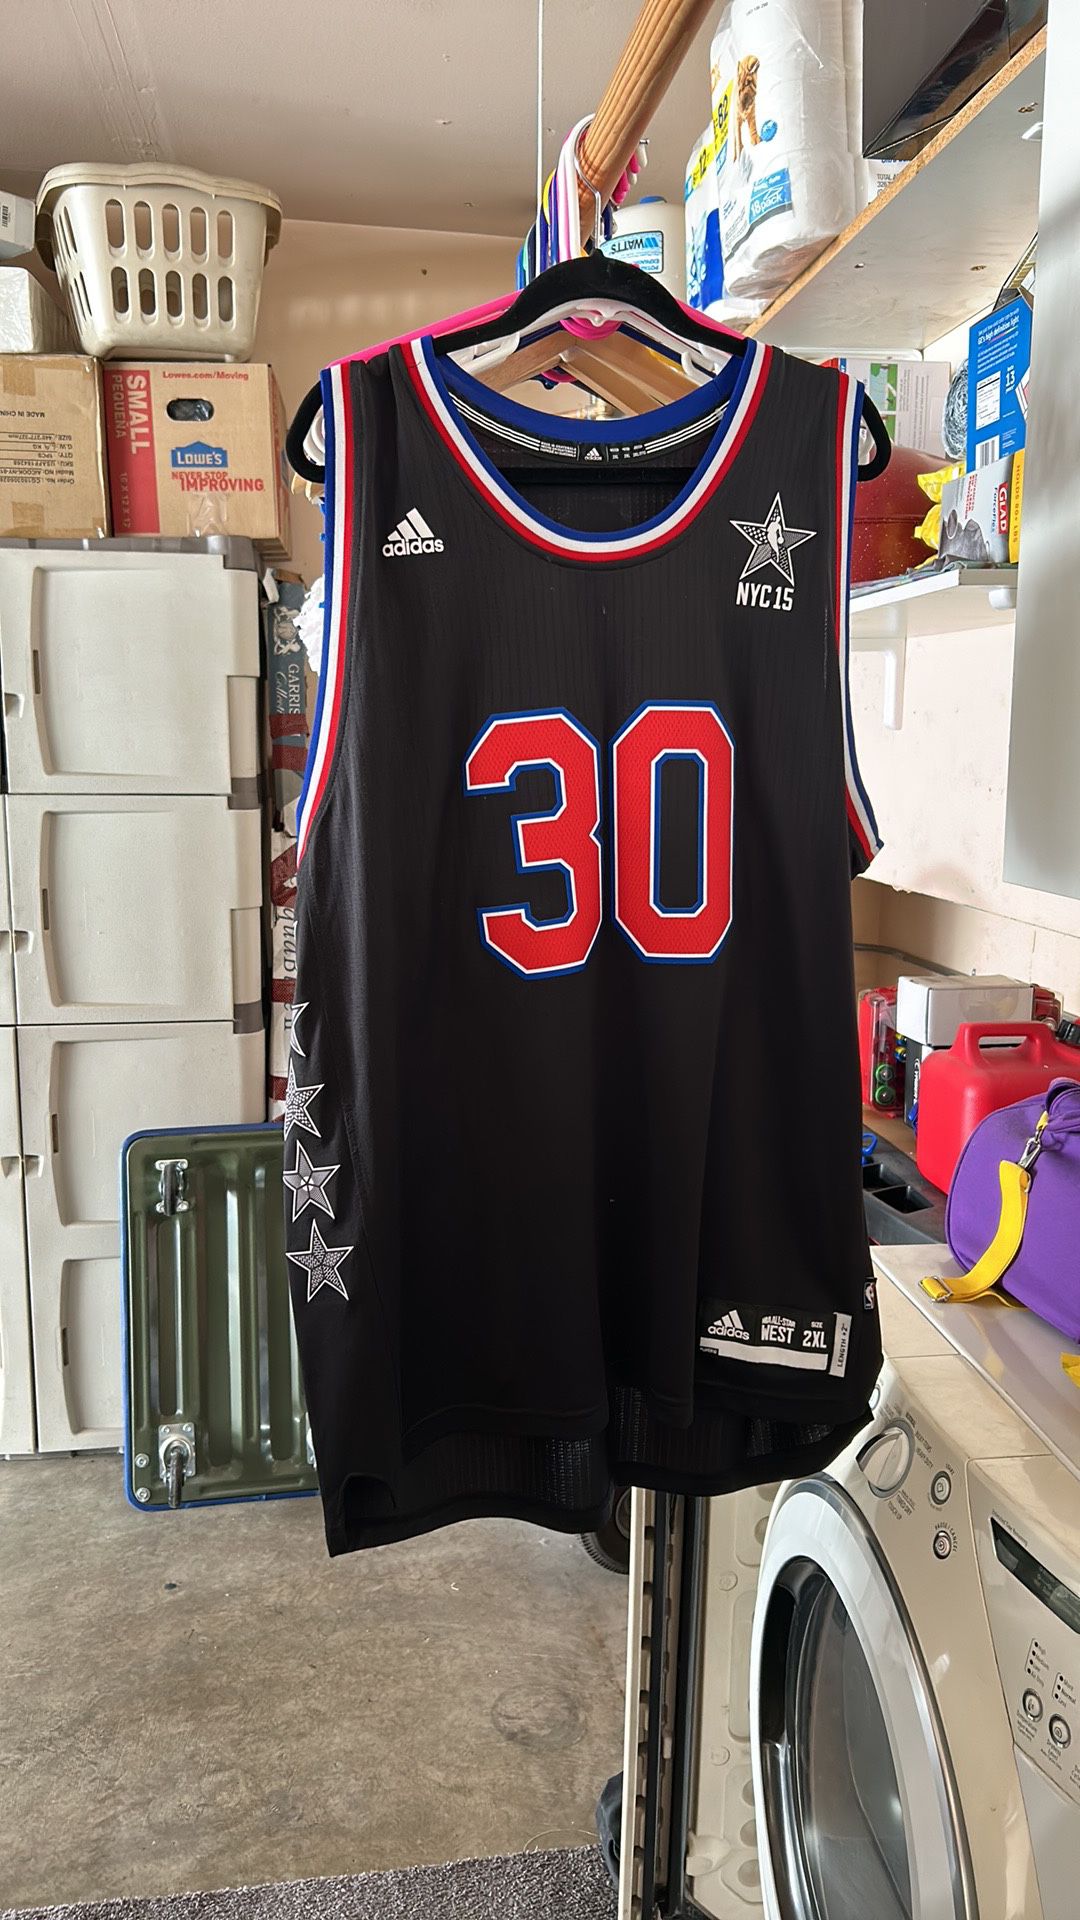 Step curry 2015 All Star West Jersey for Sale in Los Angeles, CA - OfferUp